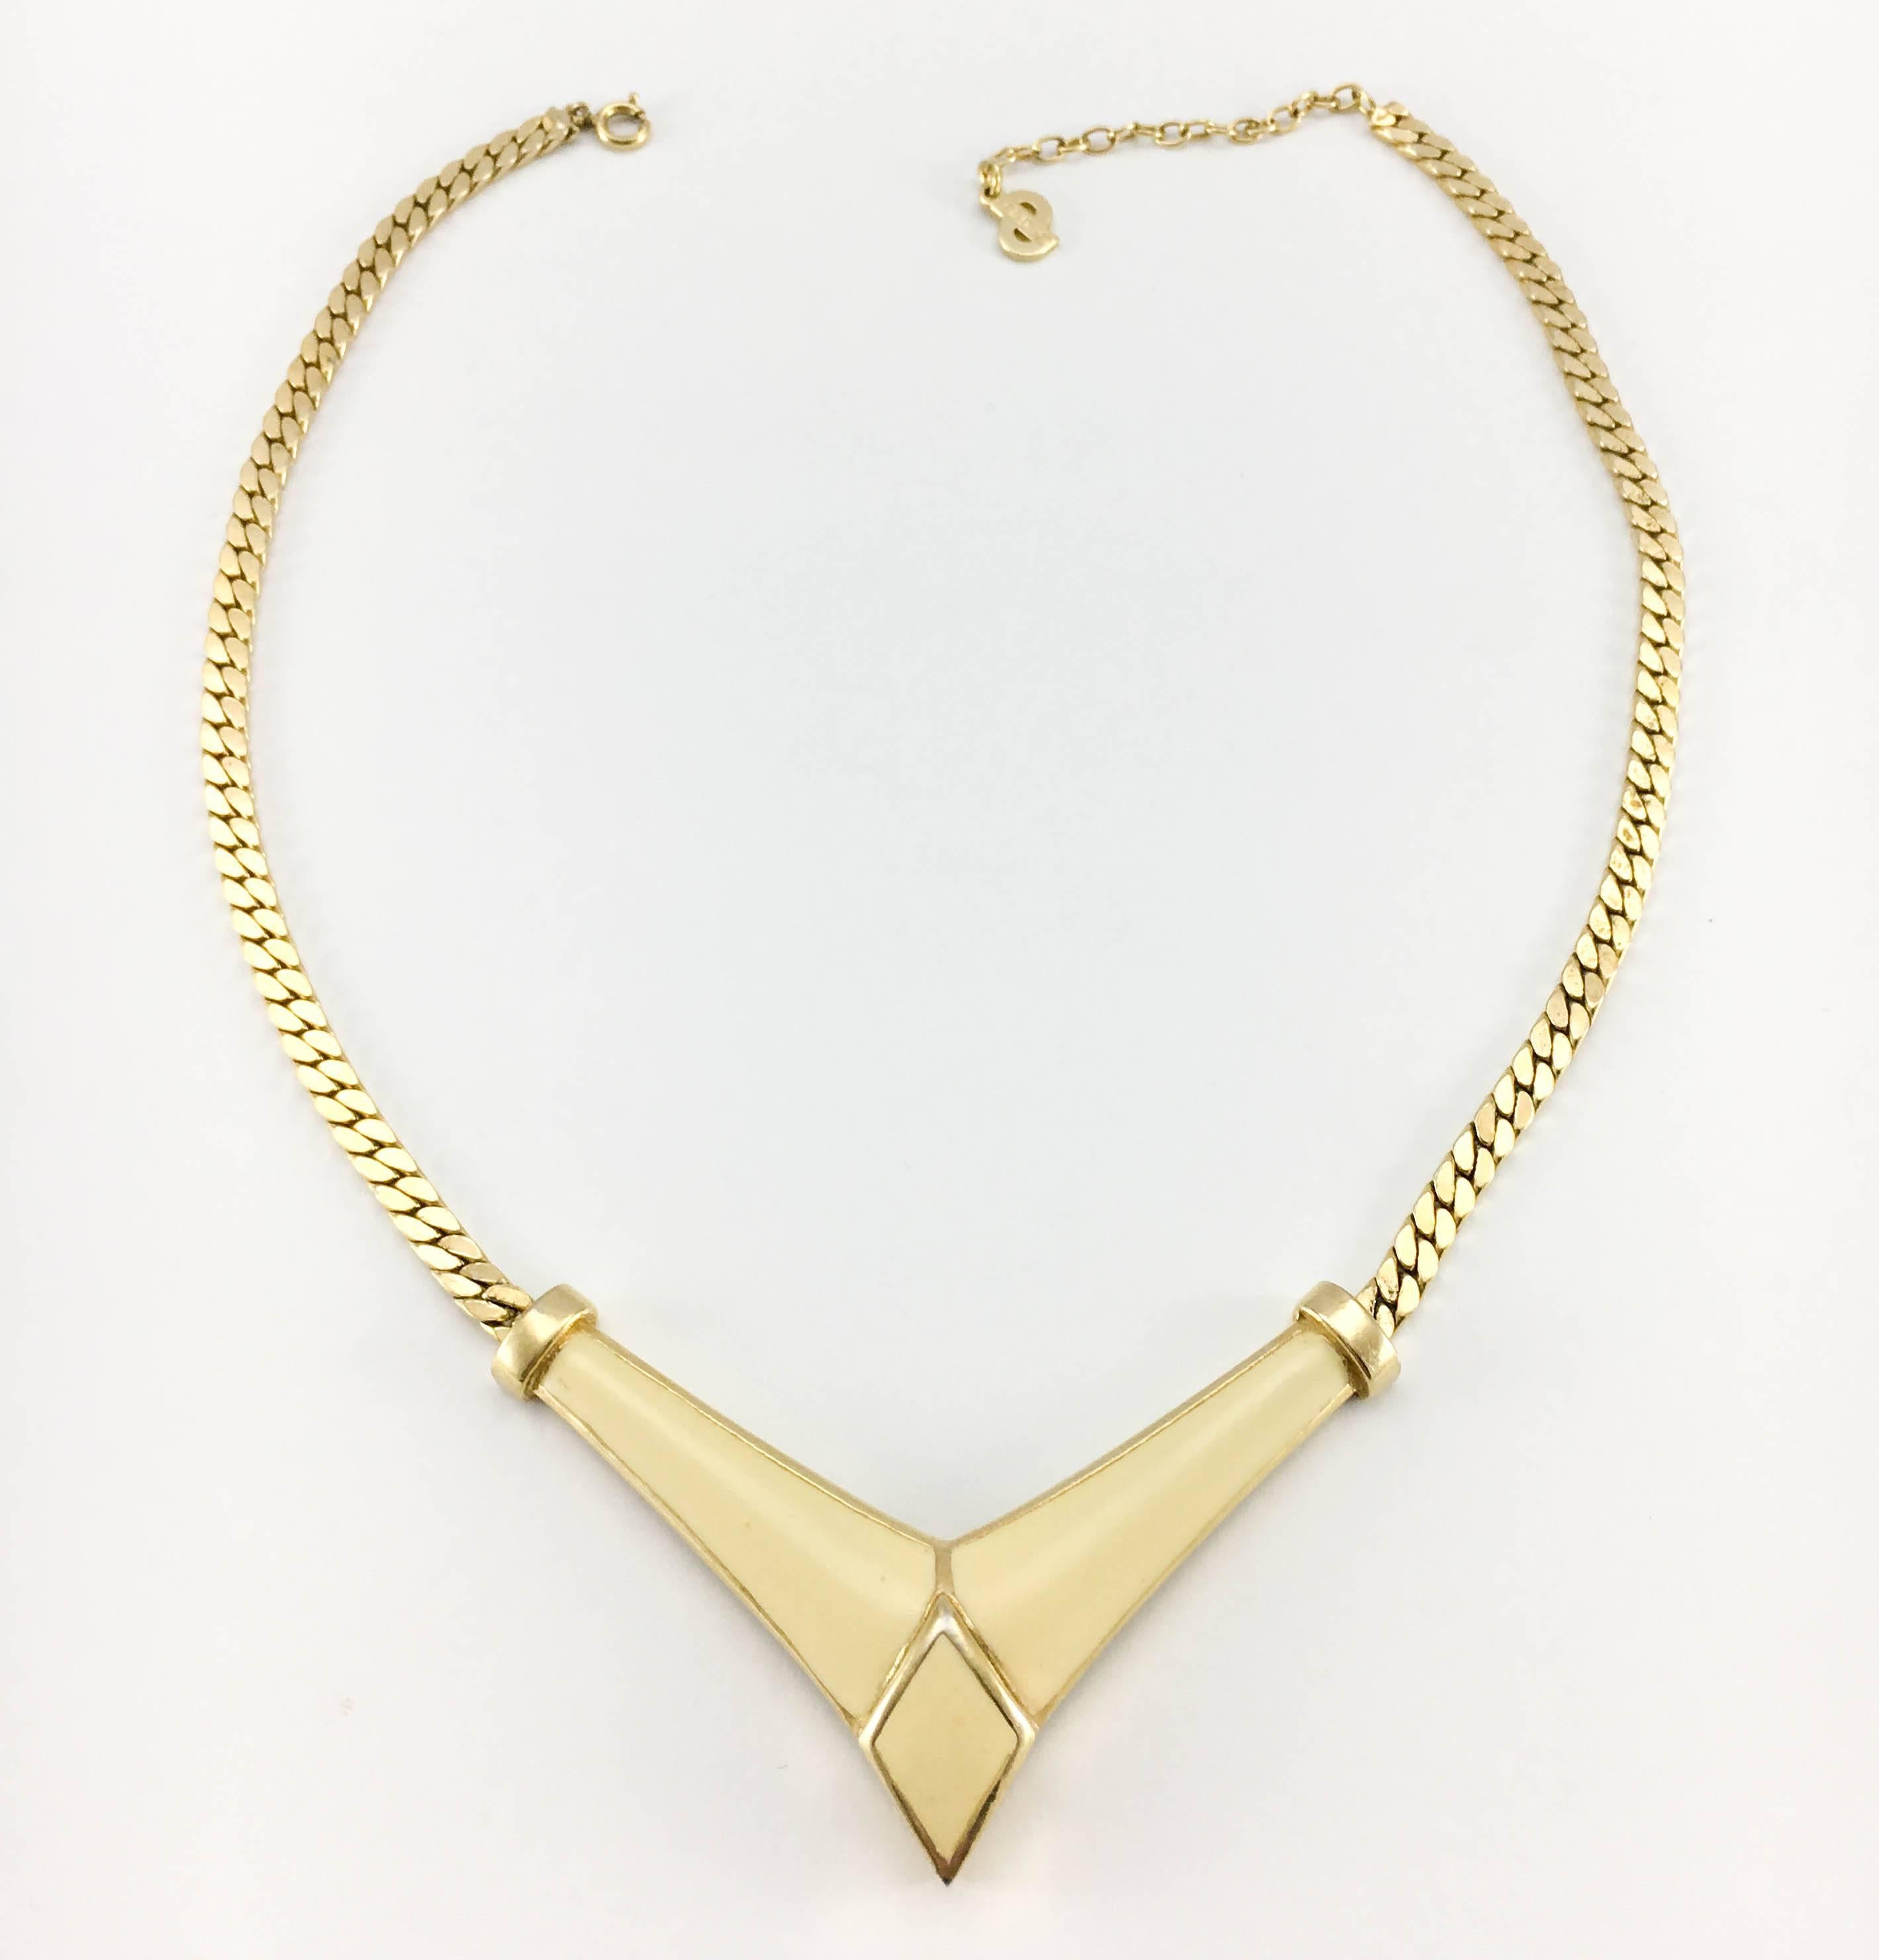 1980s Dior Enamelled Gilt Necklace In Excellent Condition For Sale In London, Chelsea